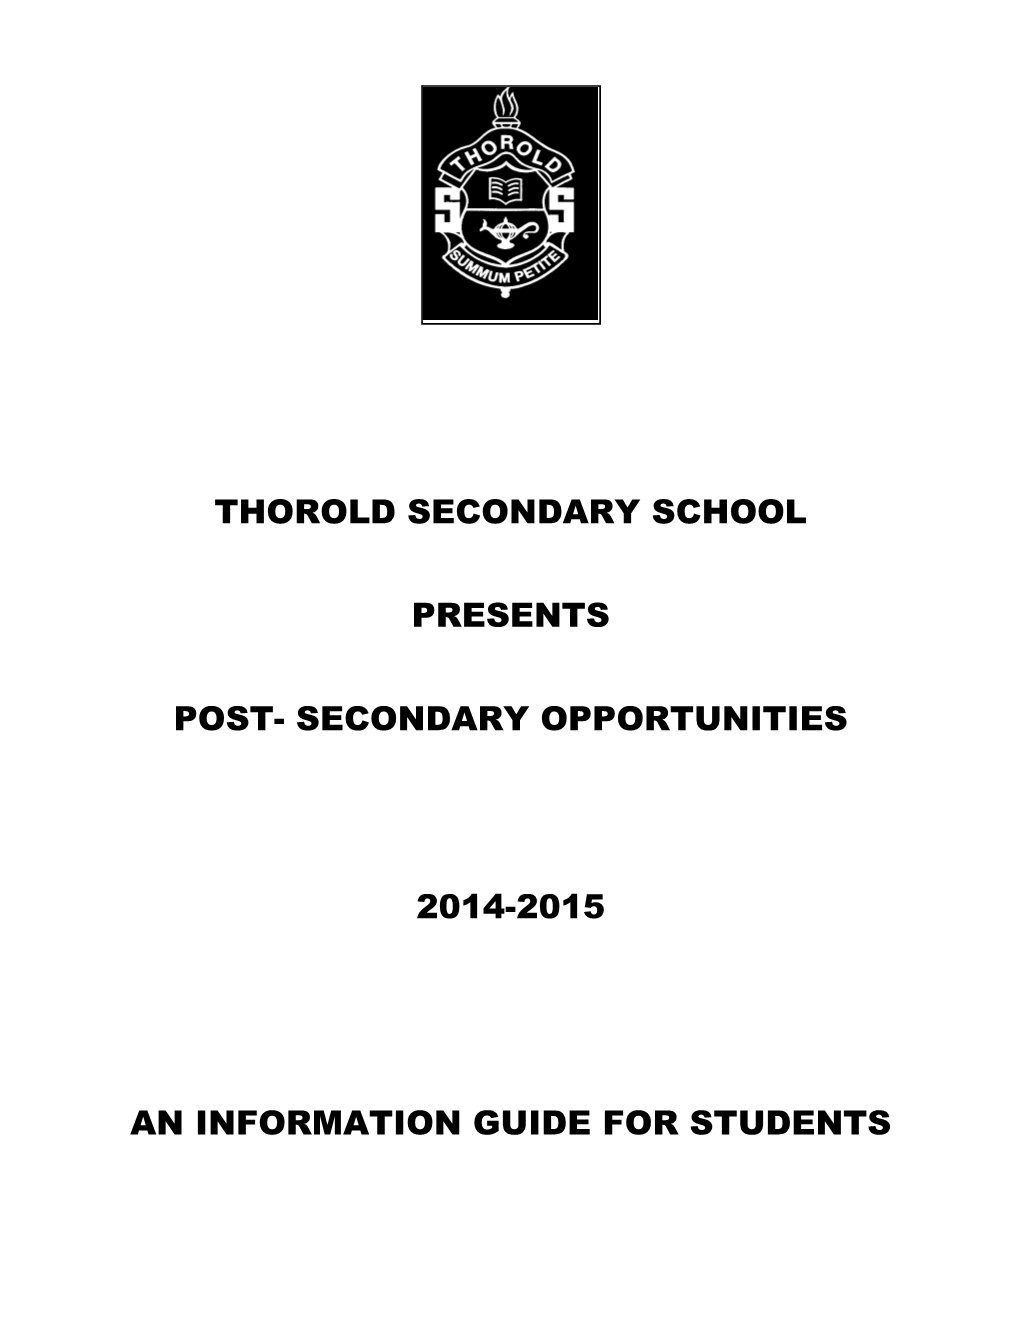 Thorold Secondary School Presents Post- Secondary Opportunities 2014-2015 an Information Guide for Students